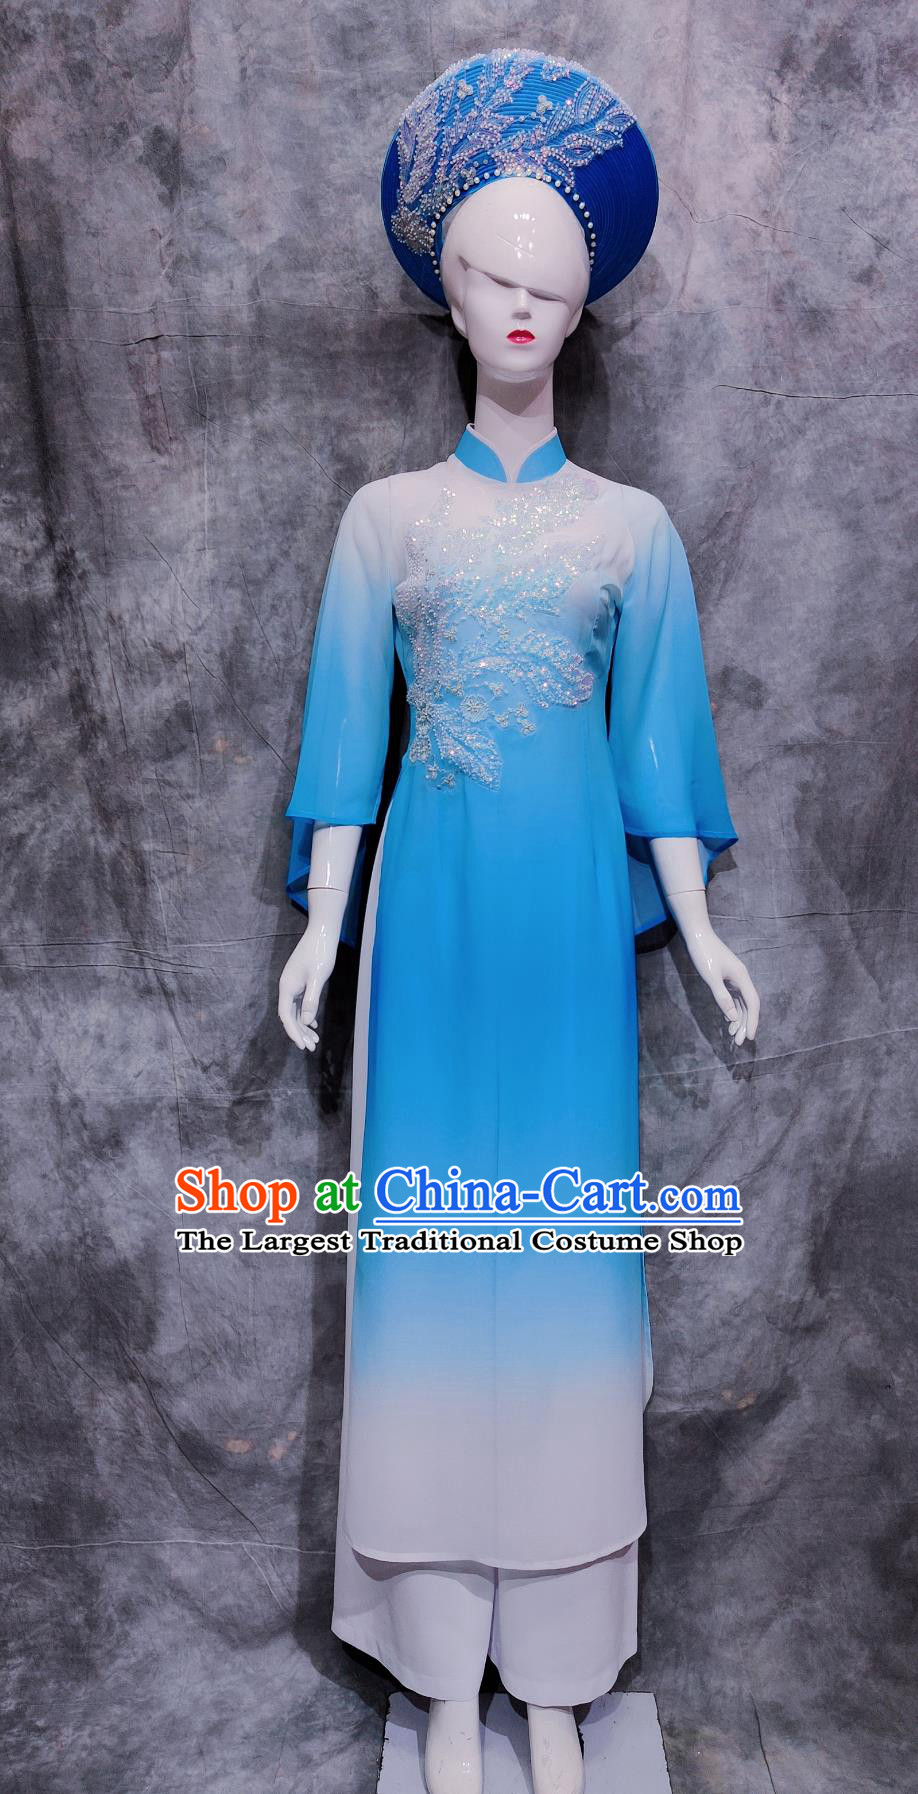 China Jing National Minority Woman Clothing Traditional Guangxi Travel March 3rd Festival Blue Aodai Dress Chinese Ethnic Dance Costume